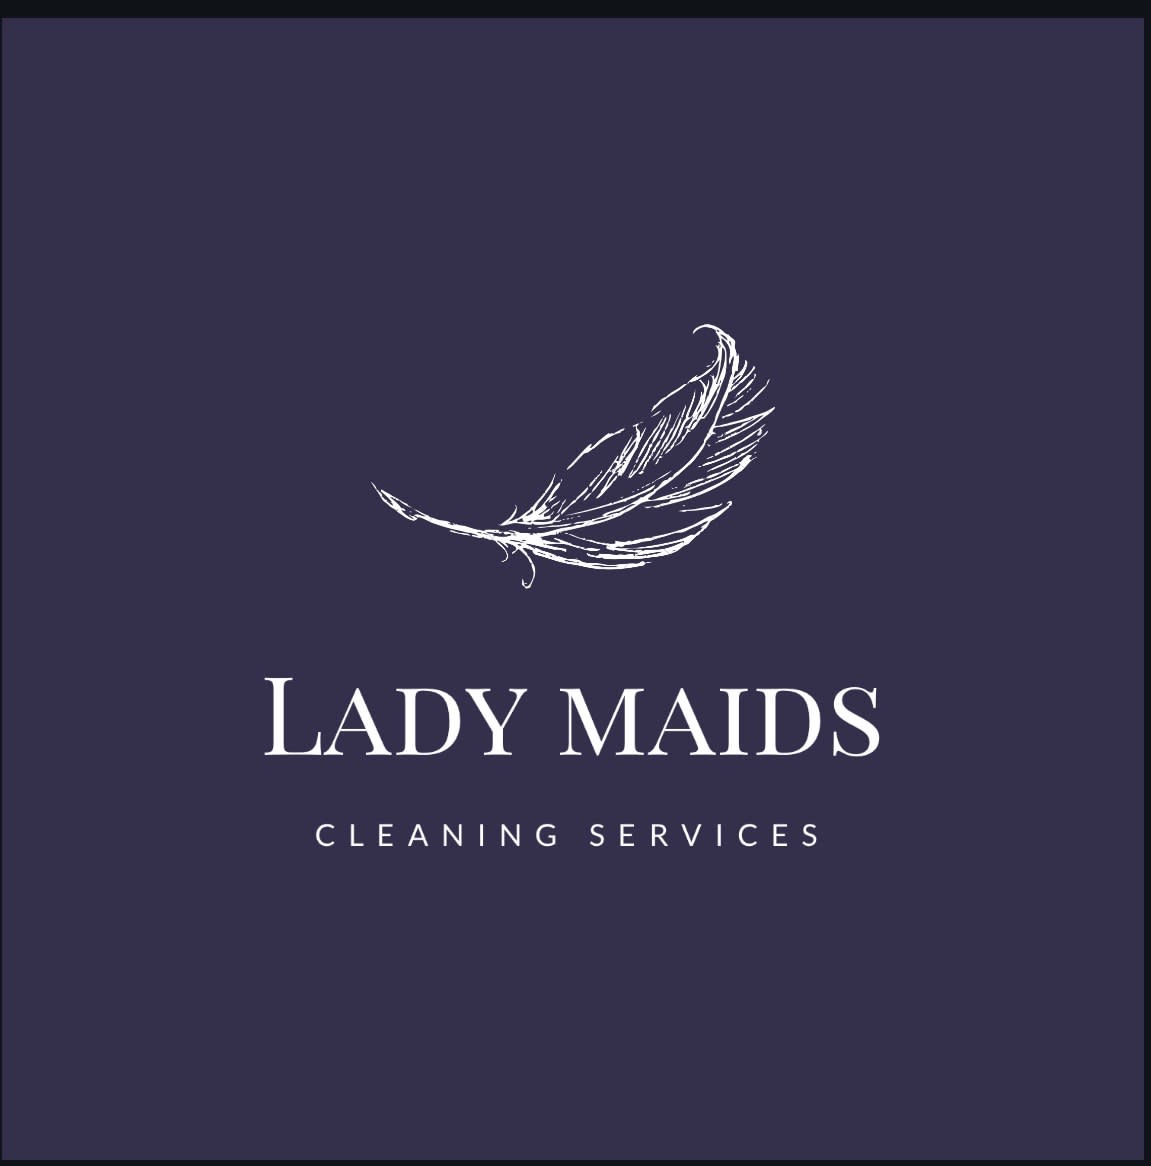 Lady Maids Cleaning Services